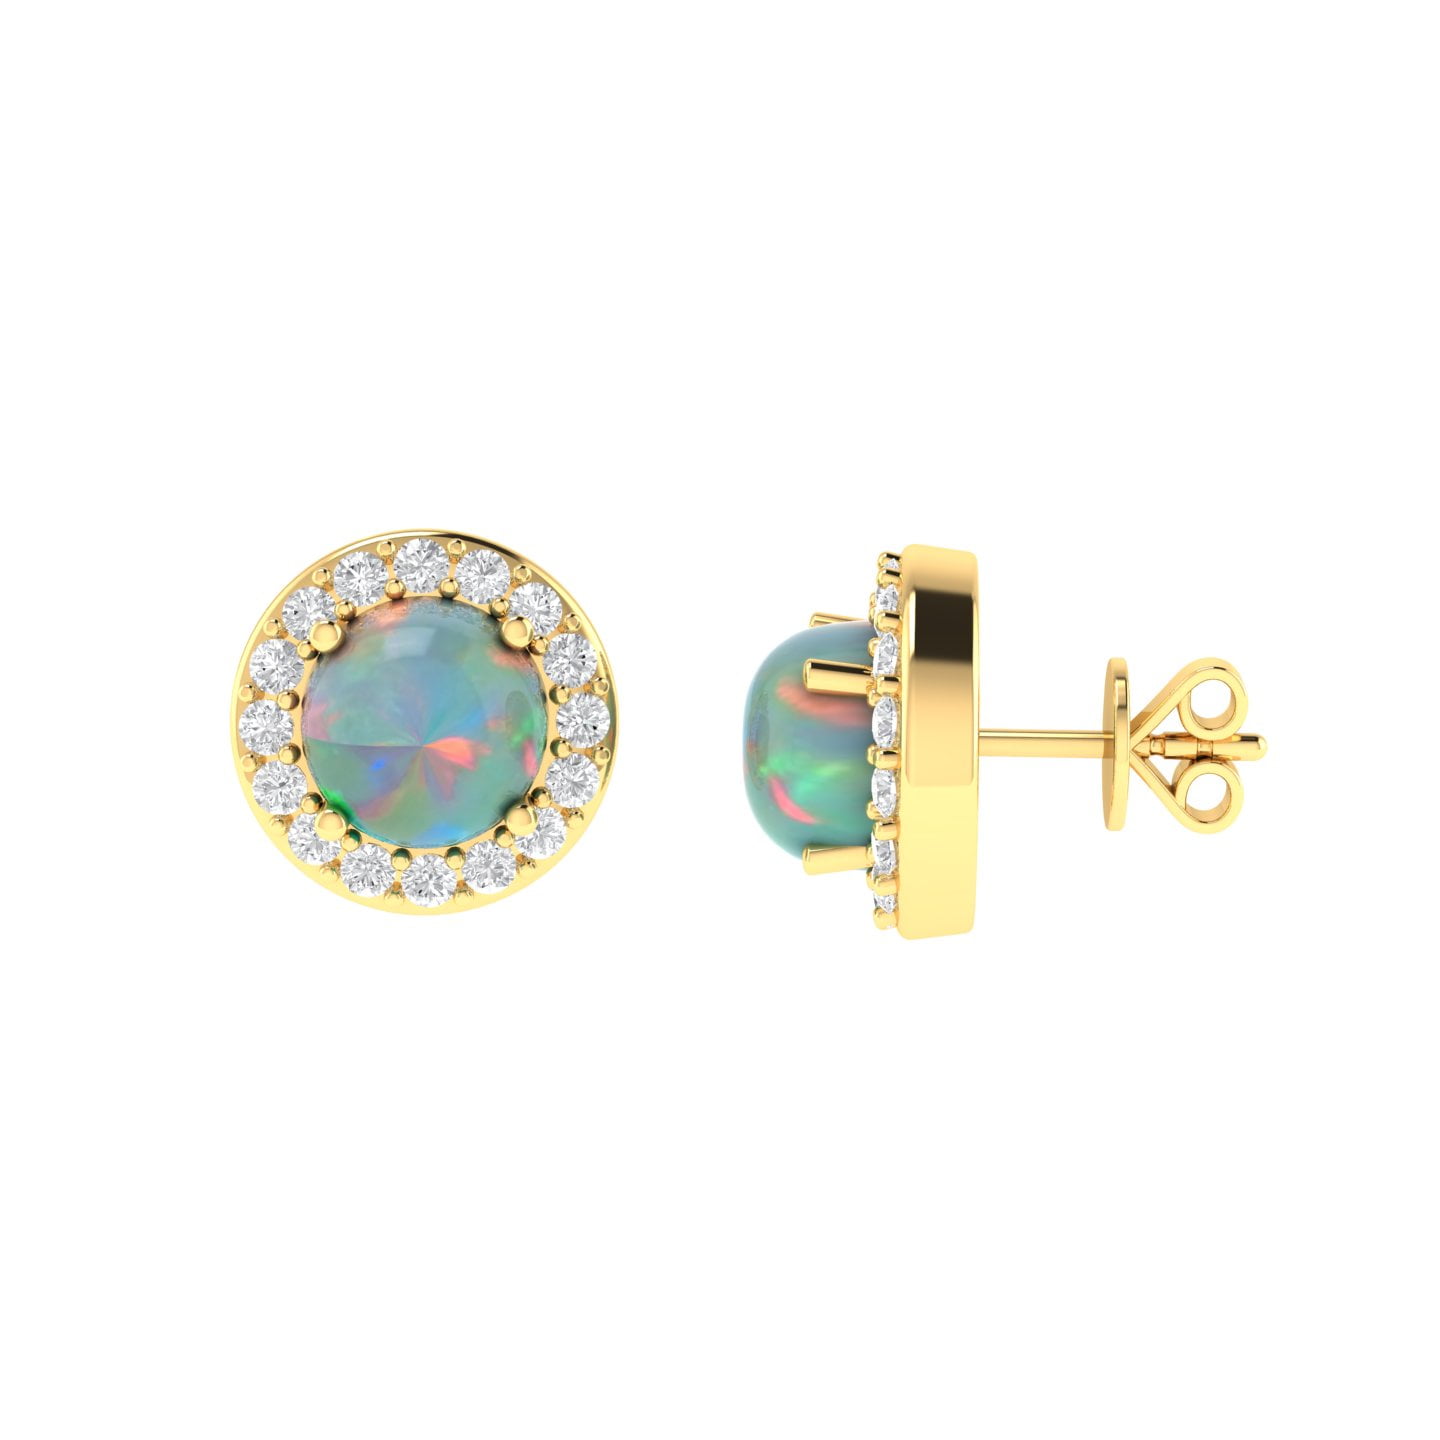 Diana Round Opal and Shining Diamond Earrings in 18K Gold (0.68ct)